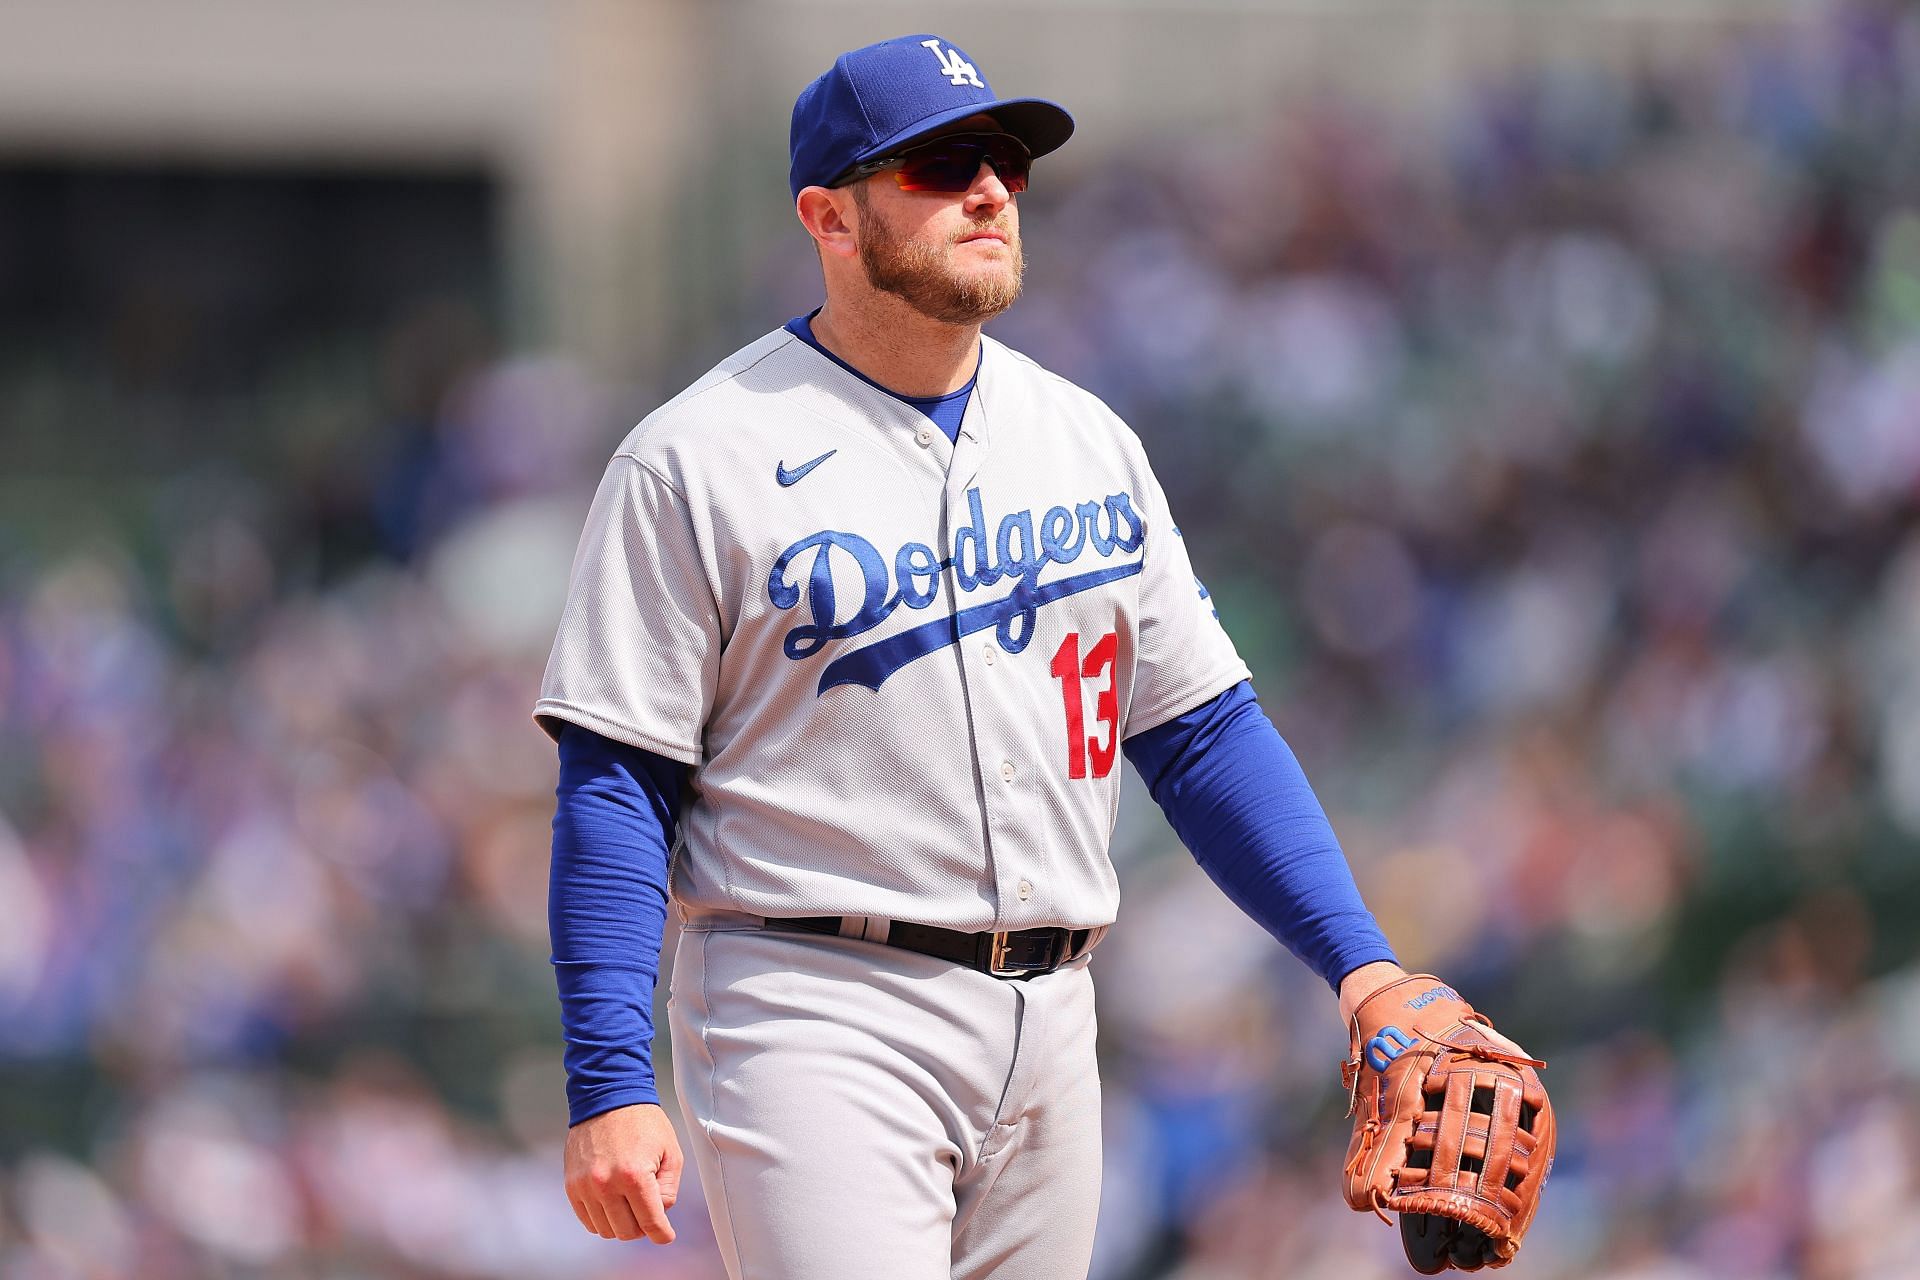 LOS ANGELES, CA - MAY 12: Los Angeles Dodgers third baseman Max Muncy (13)  bats during a regular season game between the Los Angeles Dodgers and  Philadelphia Phillies on May 12, 2022